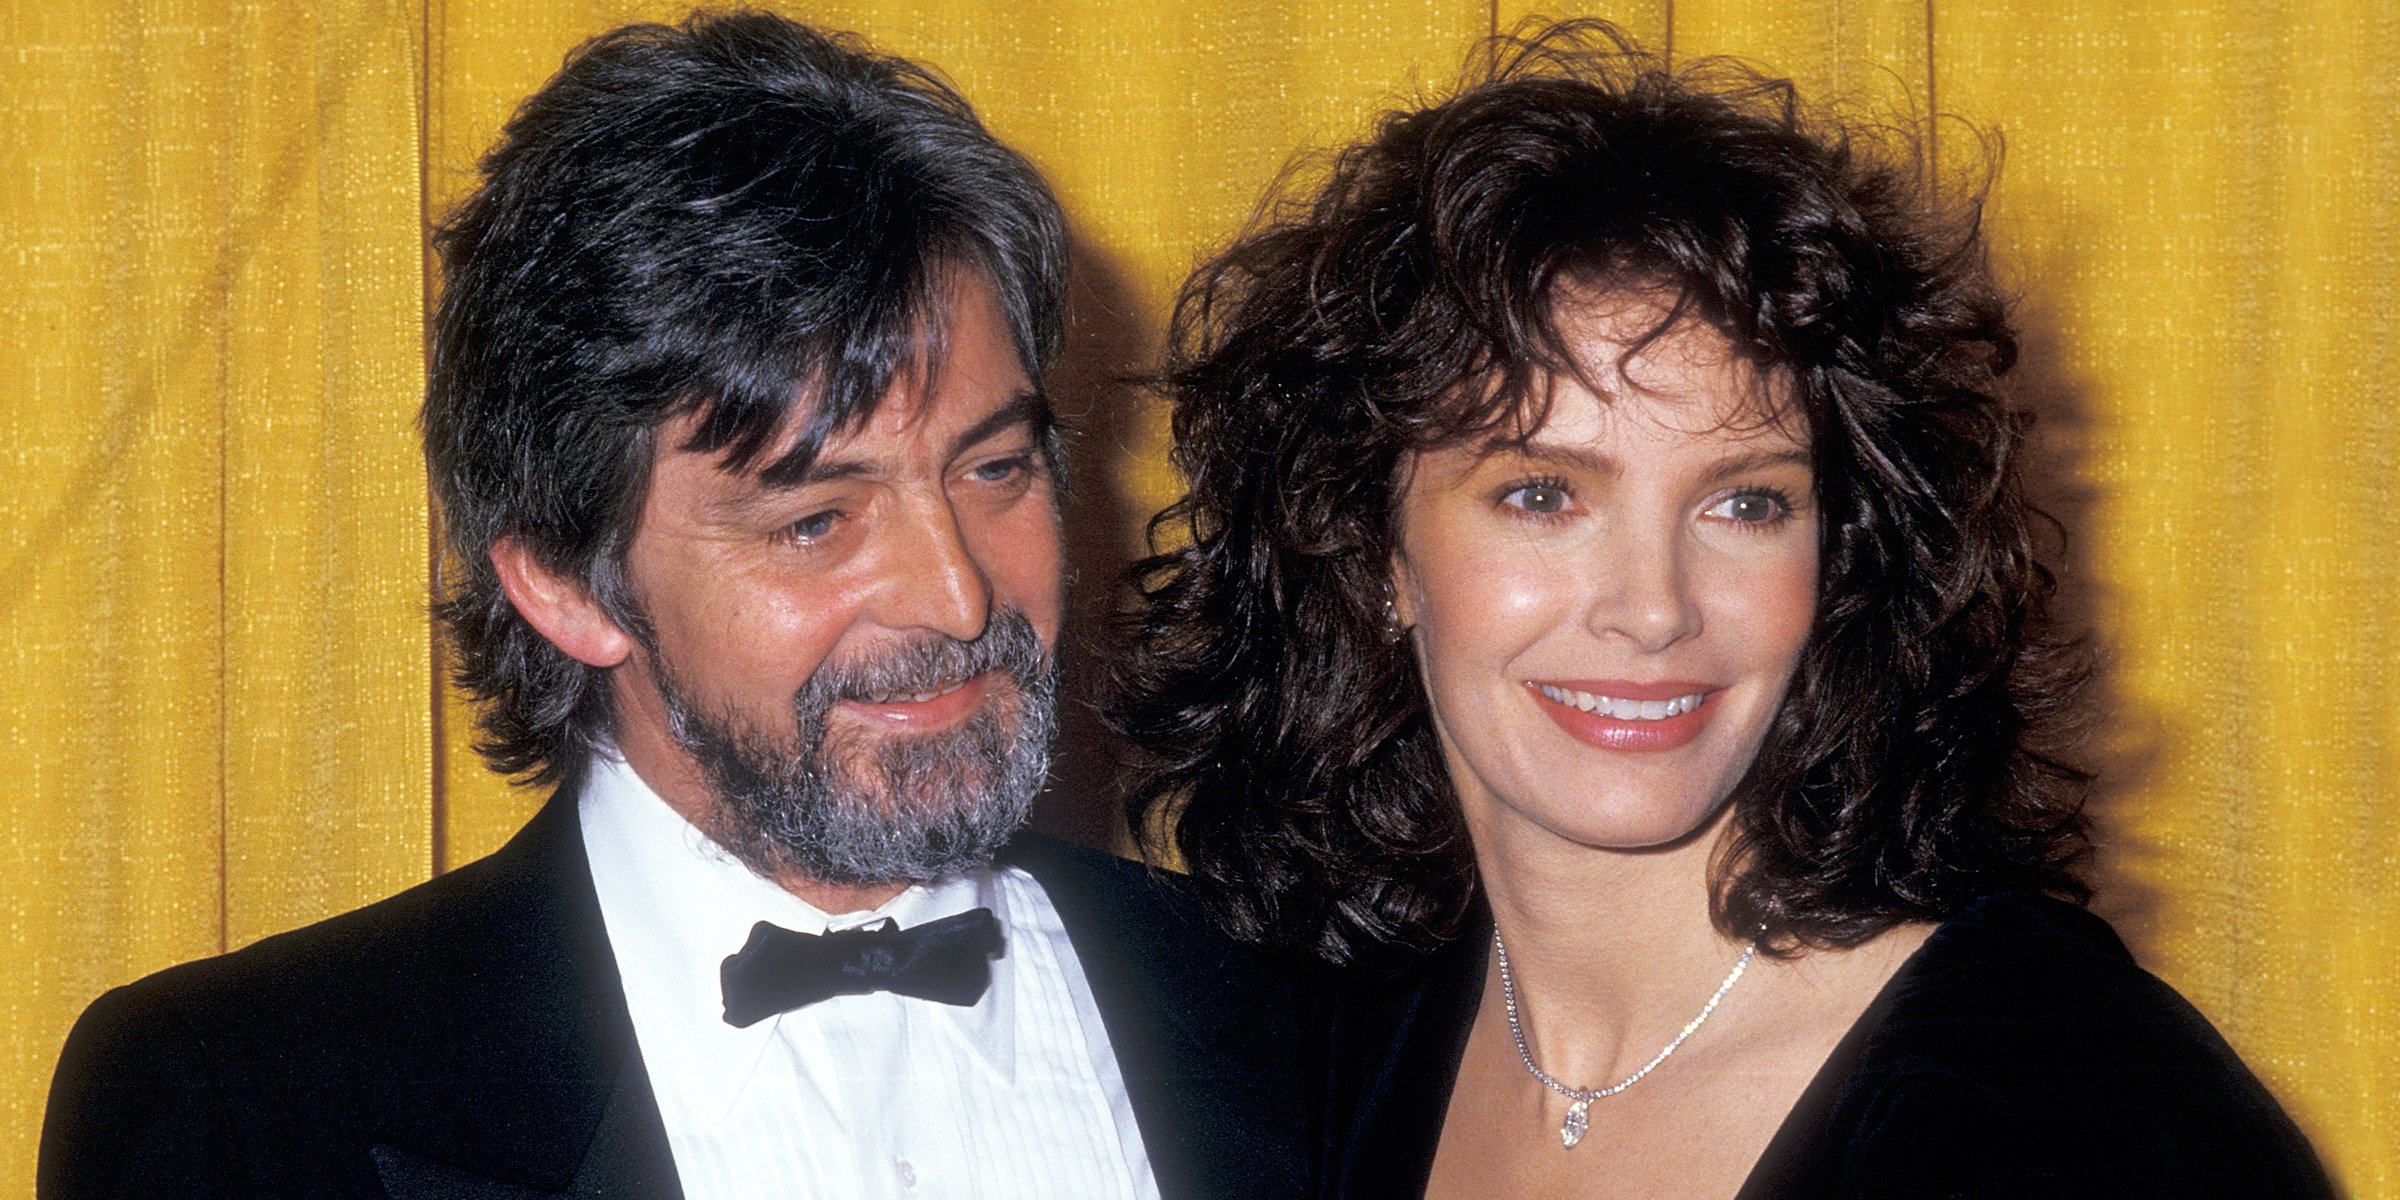 Tony Richmond and Jaclyn Smith | Source: Getty Images